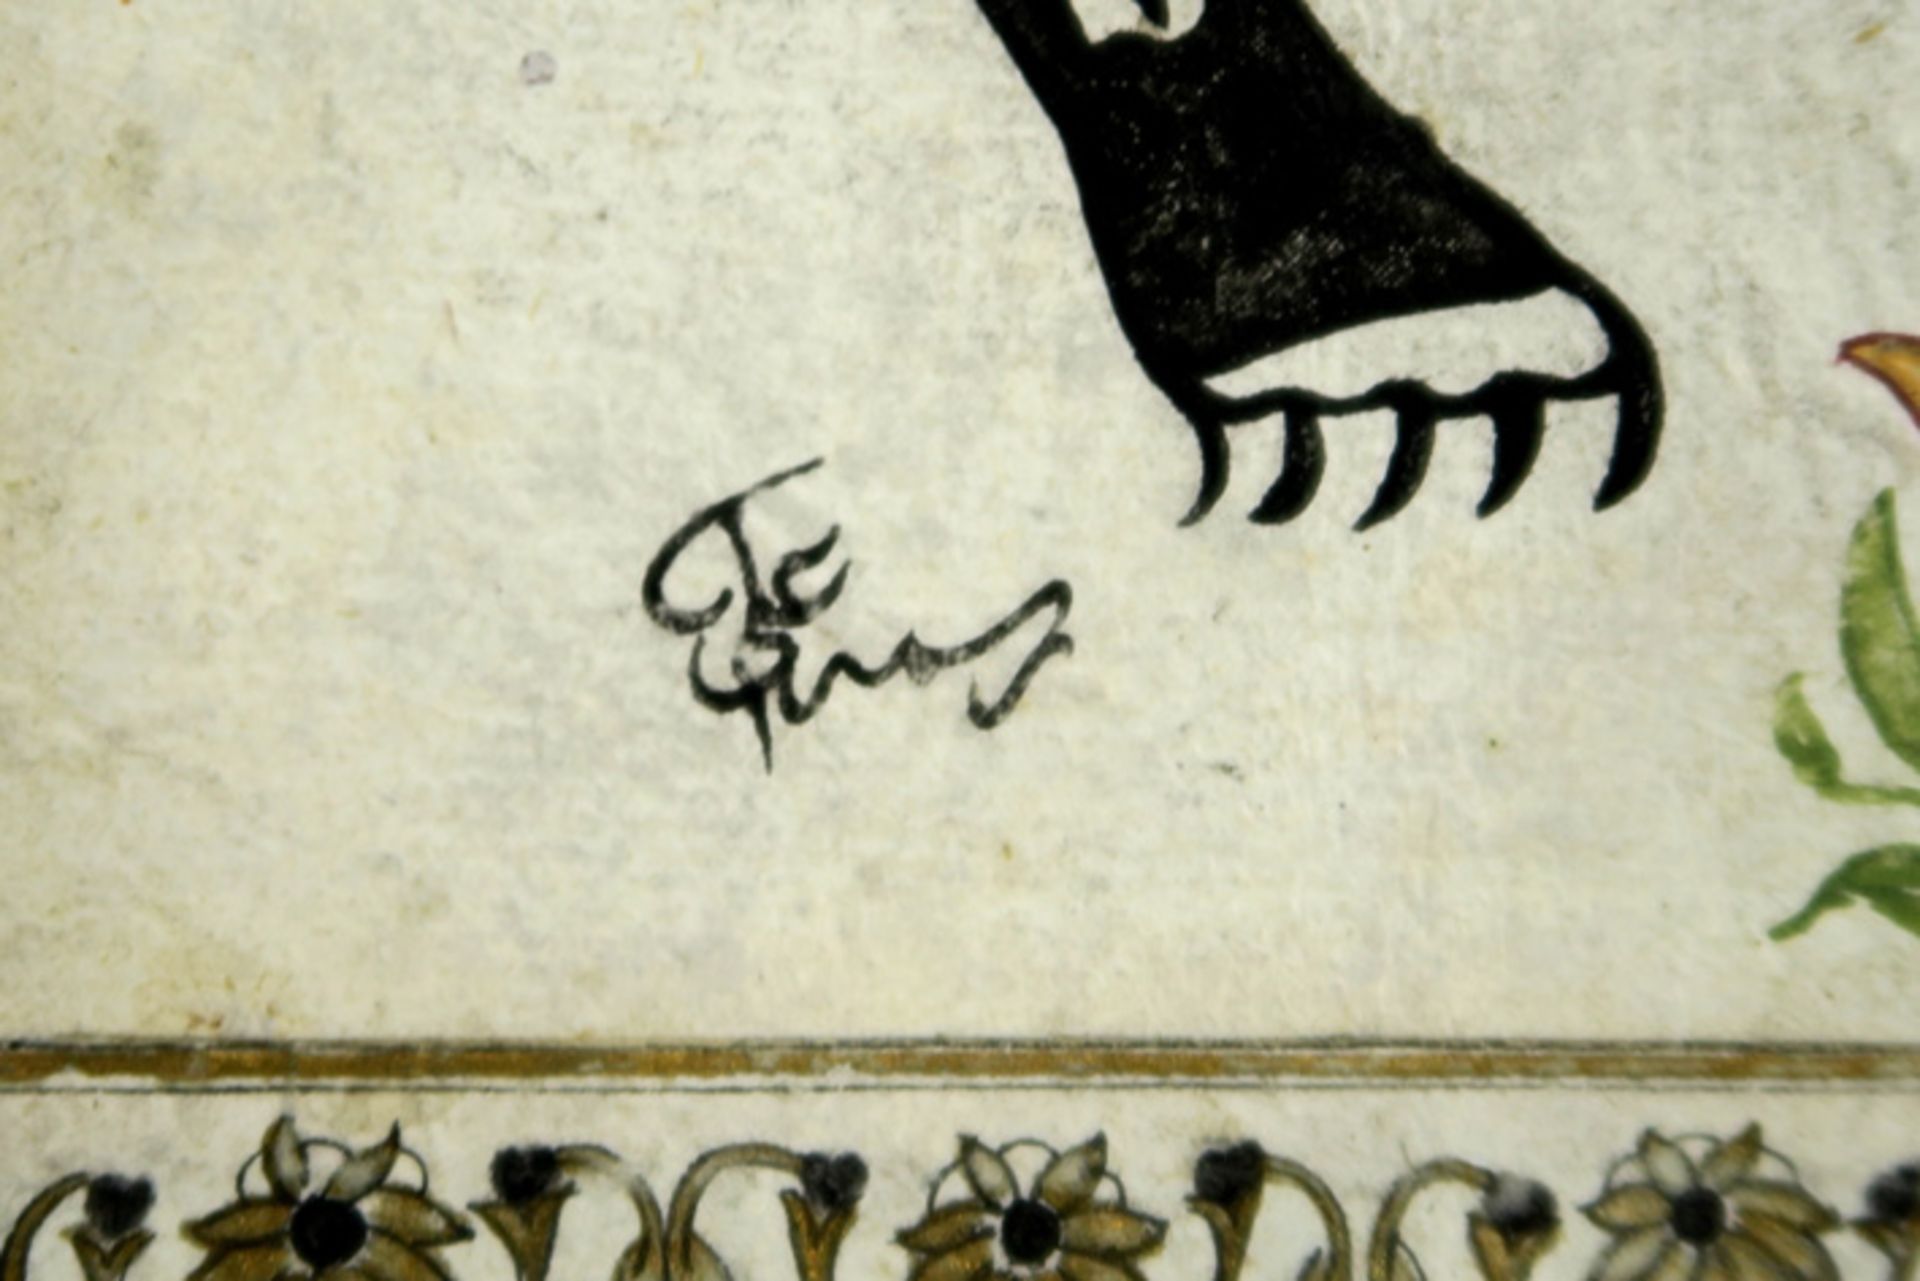 19th Cent. Ottoman calligraphy in the form of a lion, containing a text "Ali bin Abi Talib, the lion - Image 2 of 3